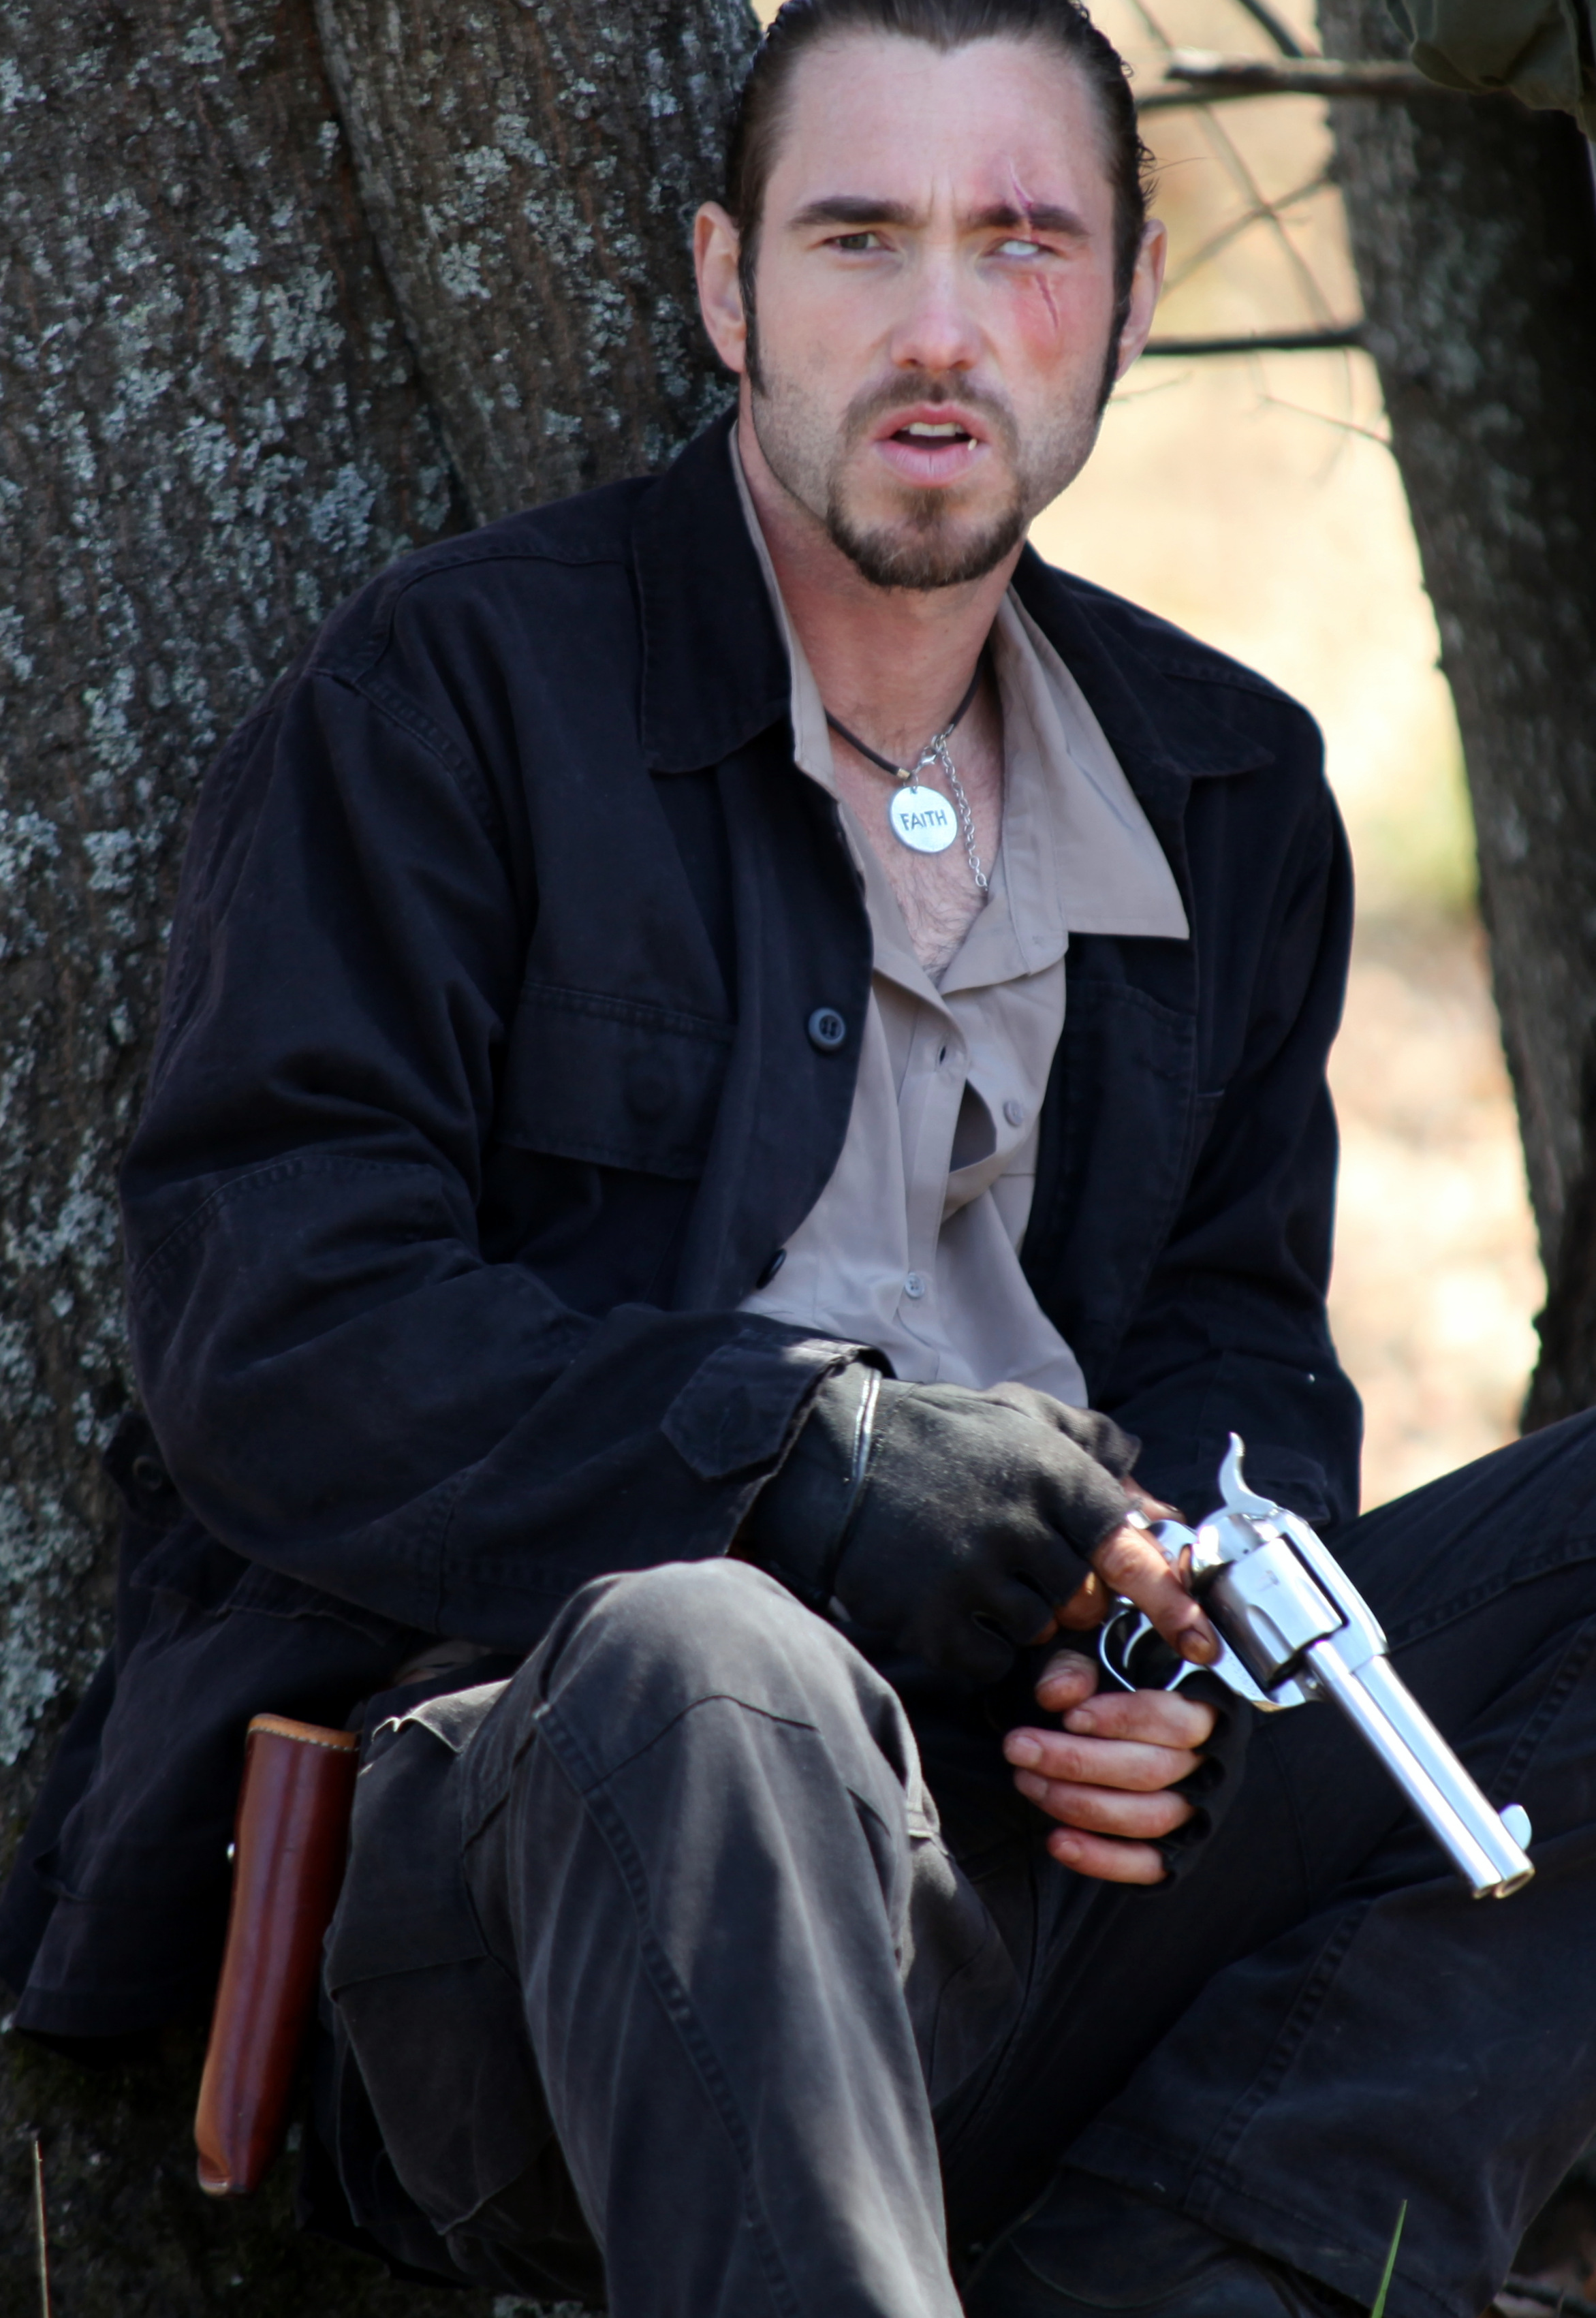 Coty Galloway as David Buick in 